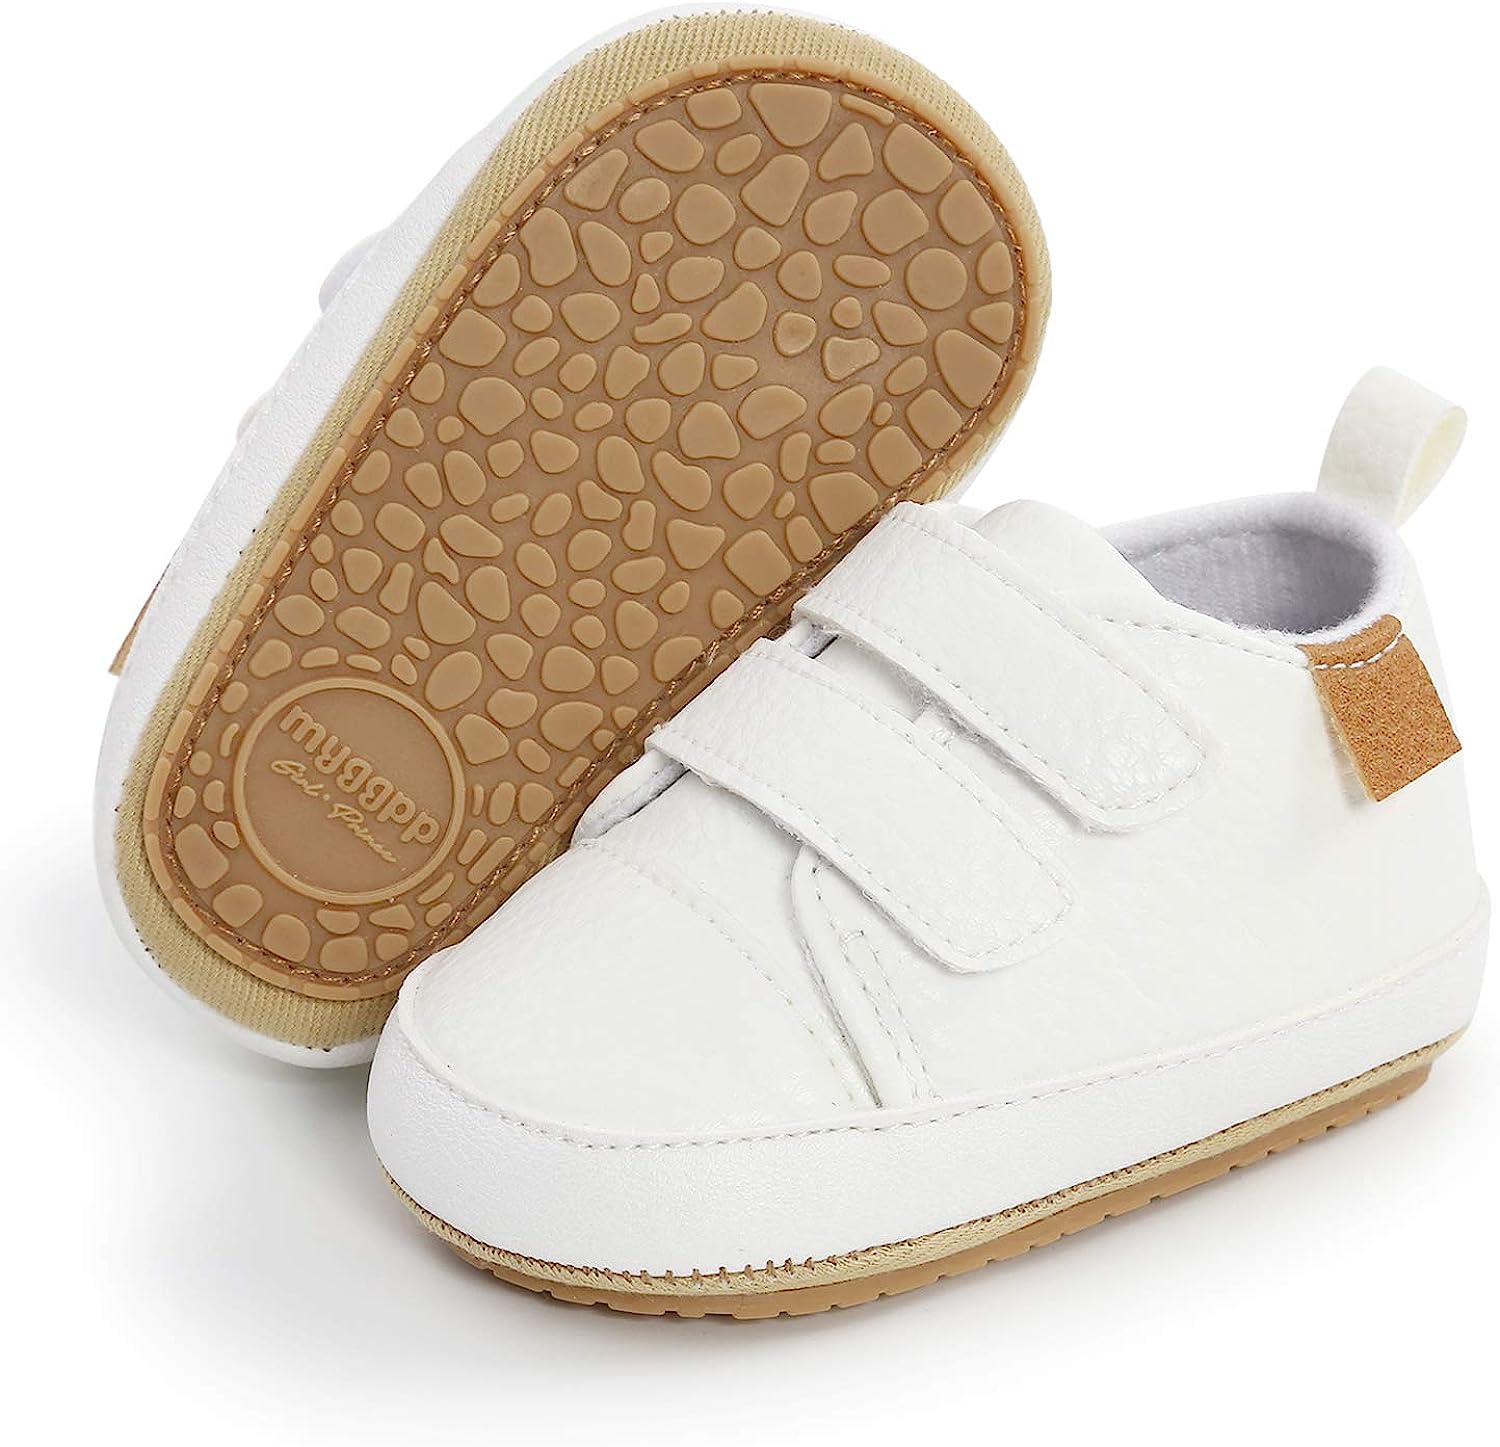 SOFMUO Baby Boys Girls High Top Ankle PU Leather [...]